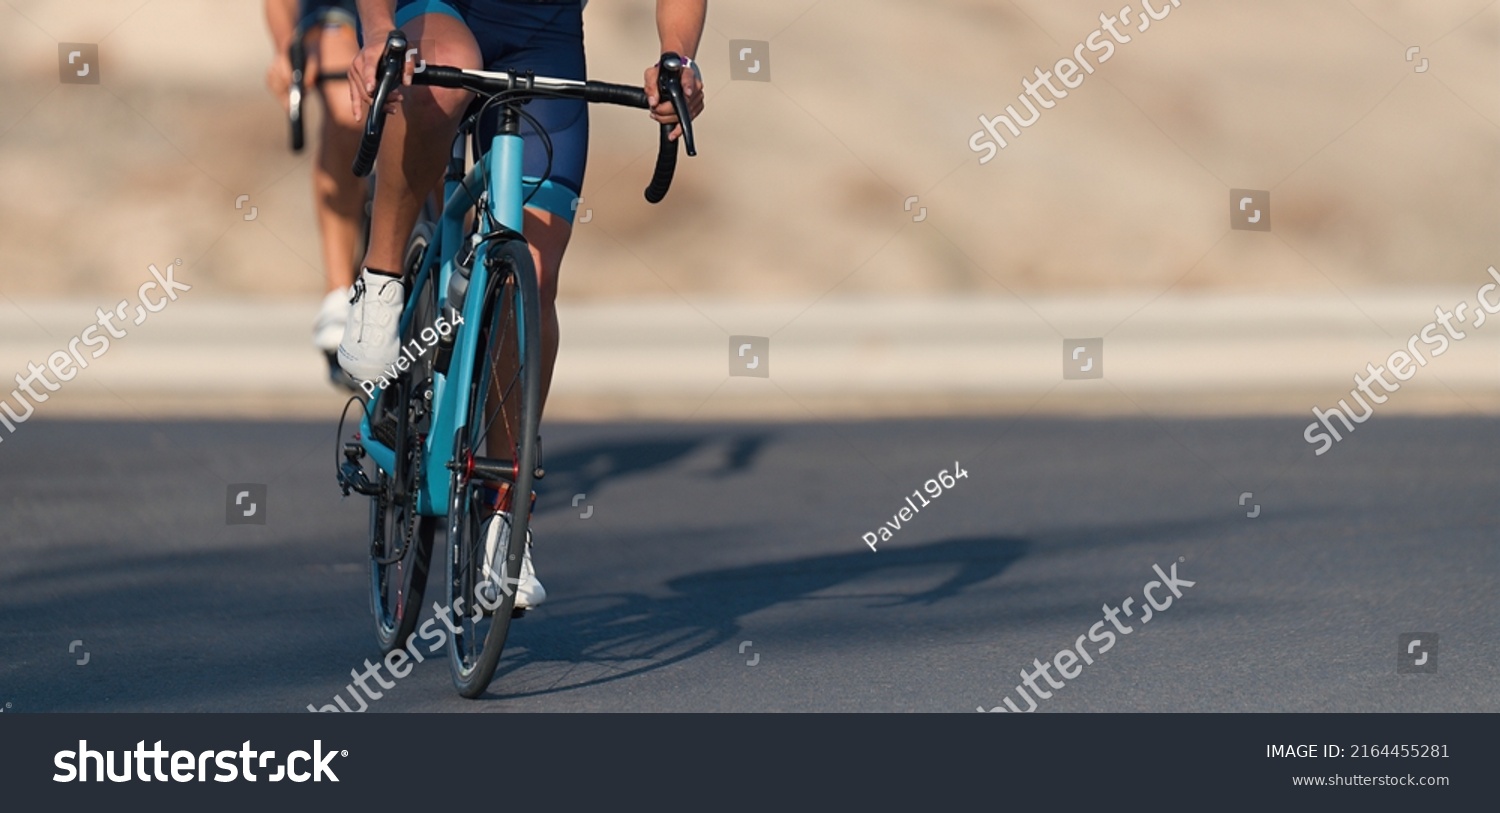 Cycling competition, cyclist athletes riding a race at high speed. Cycling sport triathletes womens biking on triathlon bike #2164455281